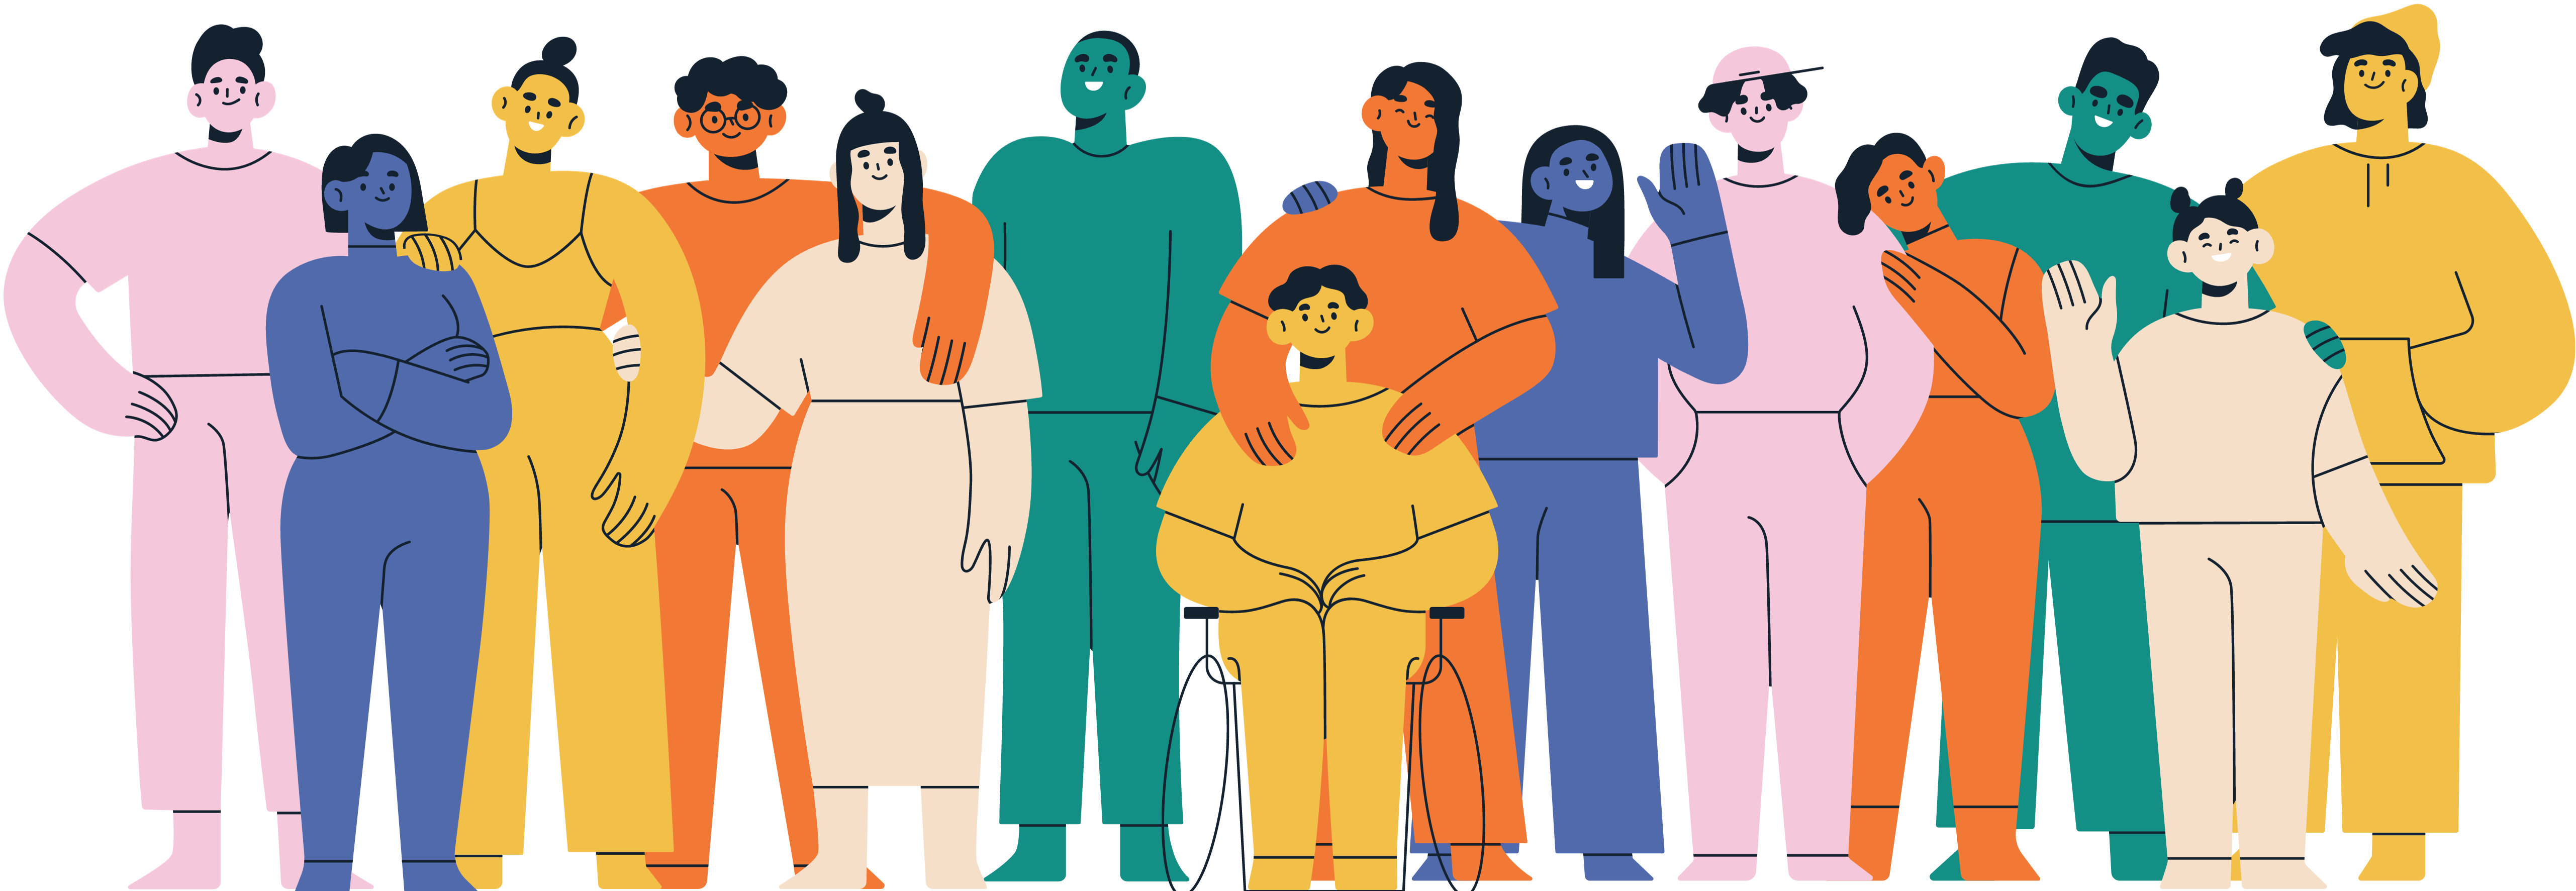 Illustration of a diverse group of people.